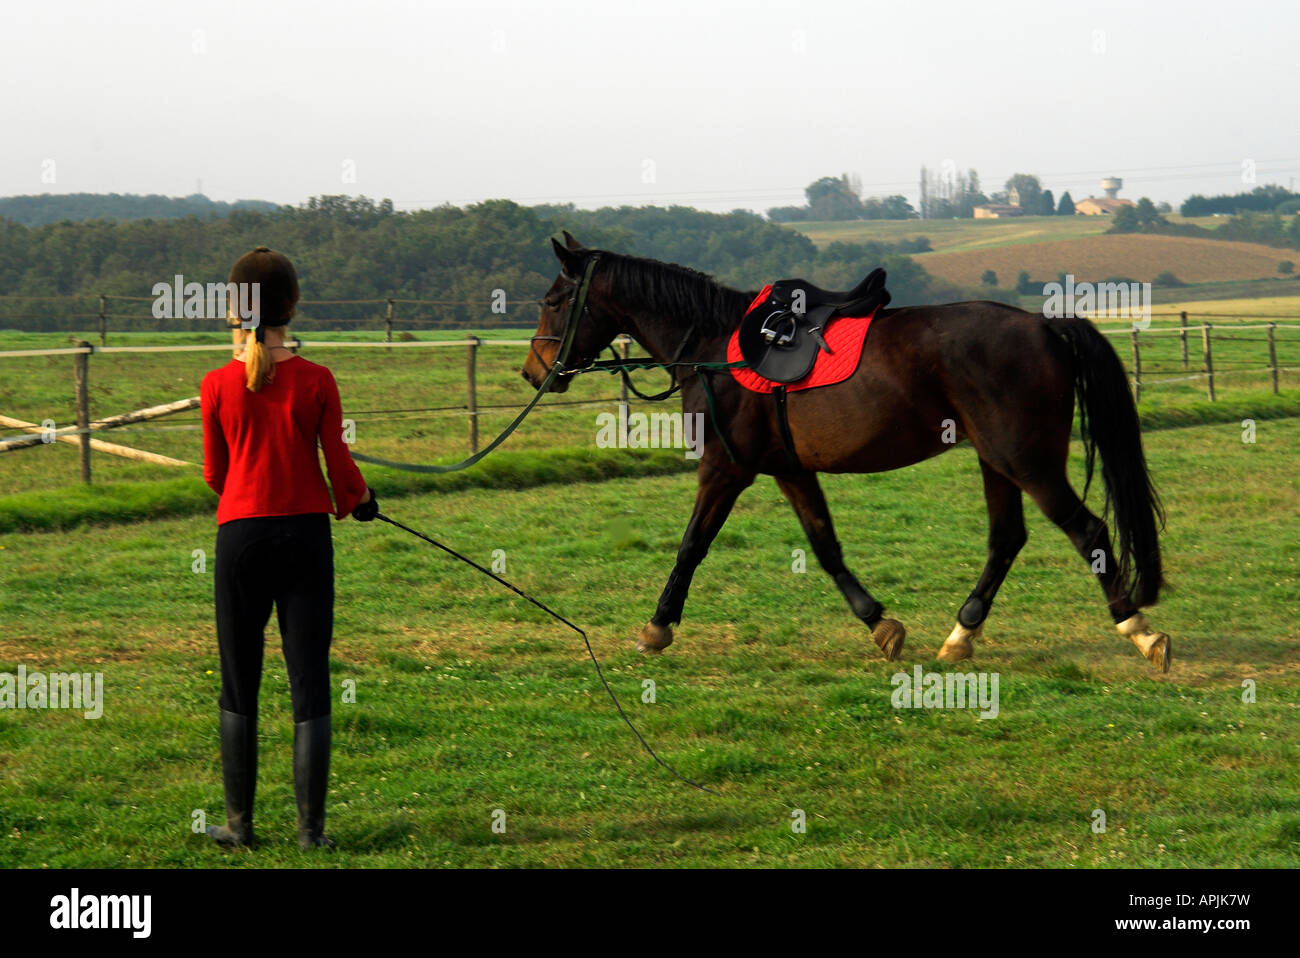 France, Southwest. Natalie lunging her horse Luquet Stock Photo